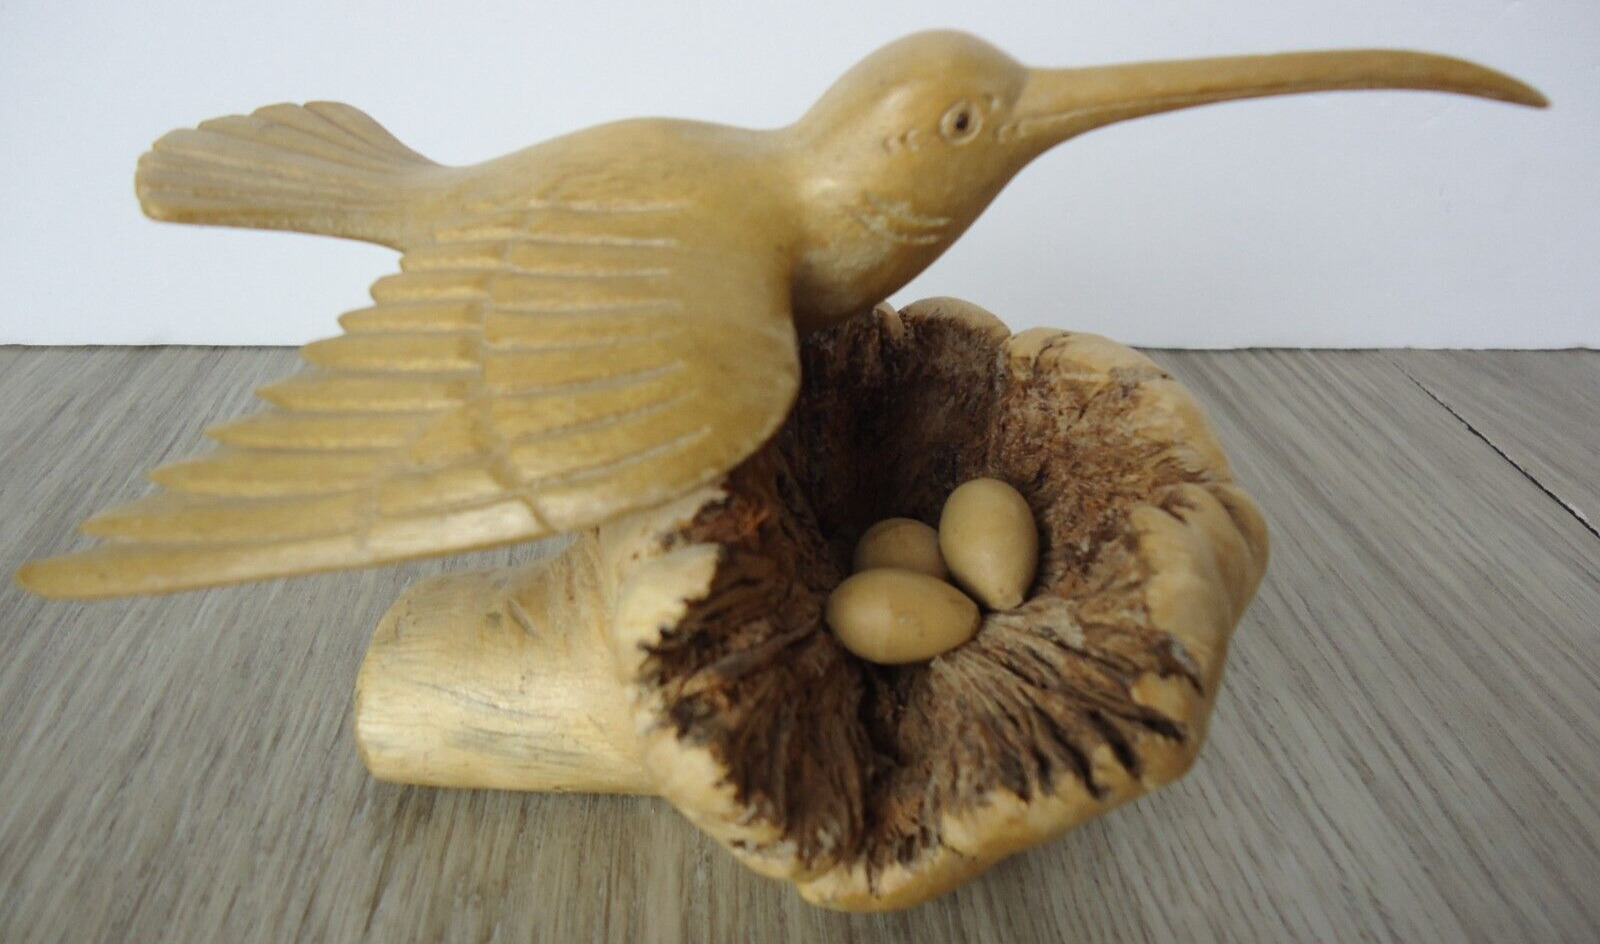 Carved Wooden Hummingbird on Nest 3 Eggs Detailed 3.5 by 6 in Figurine Repaired